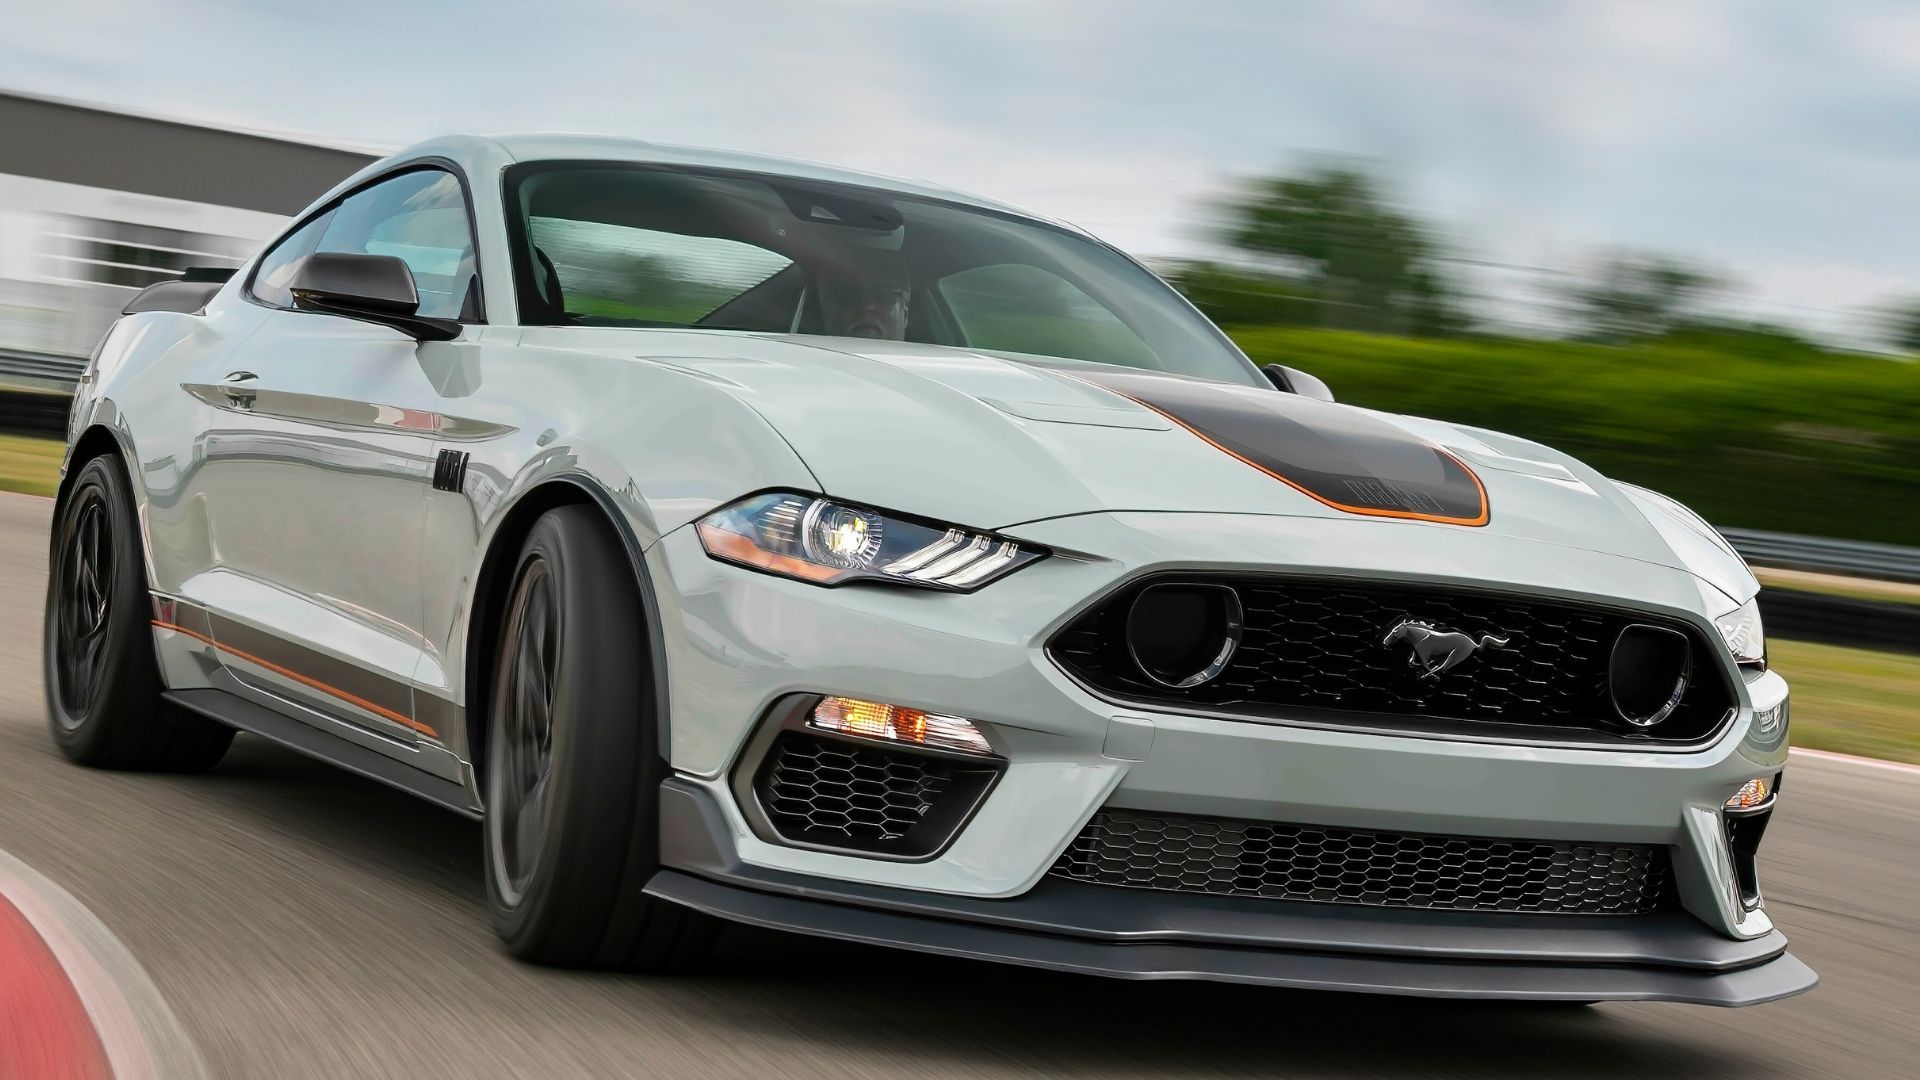 Ford Mustang Crowned Best-Selling Sports Car Again